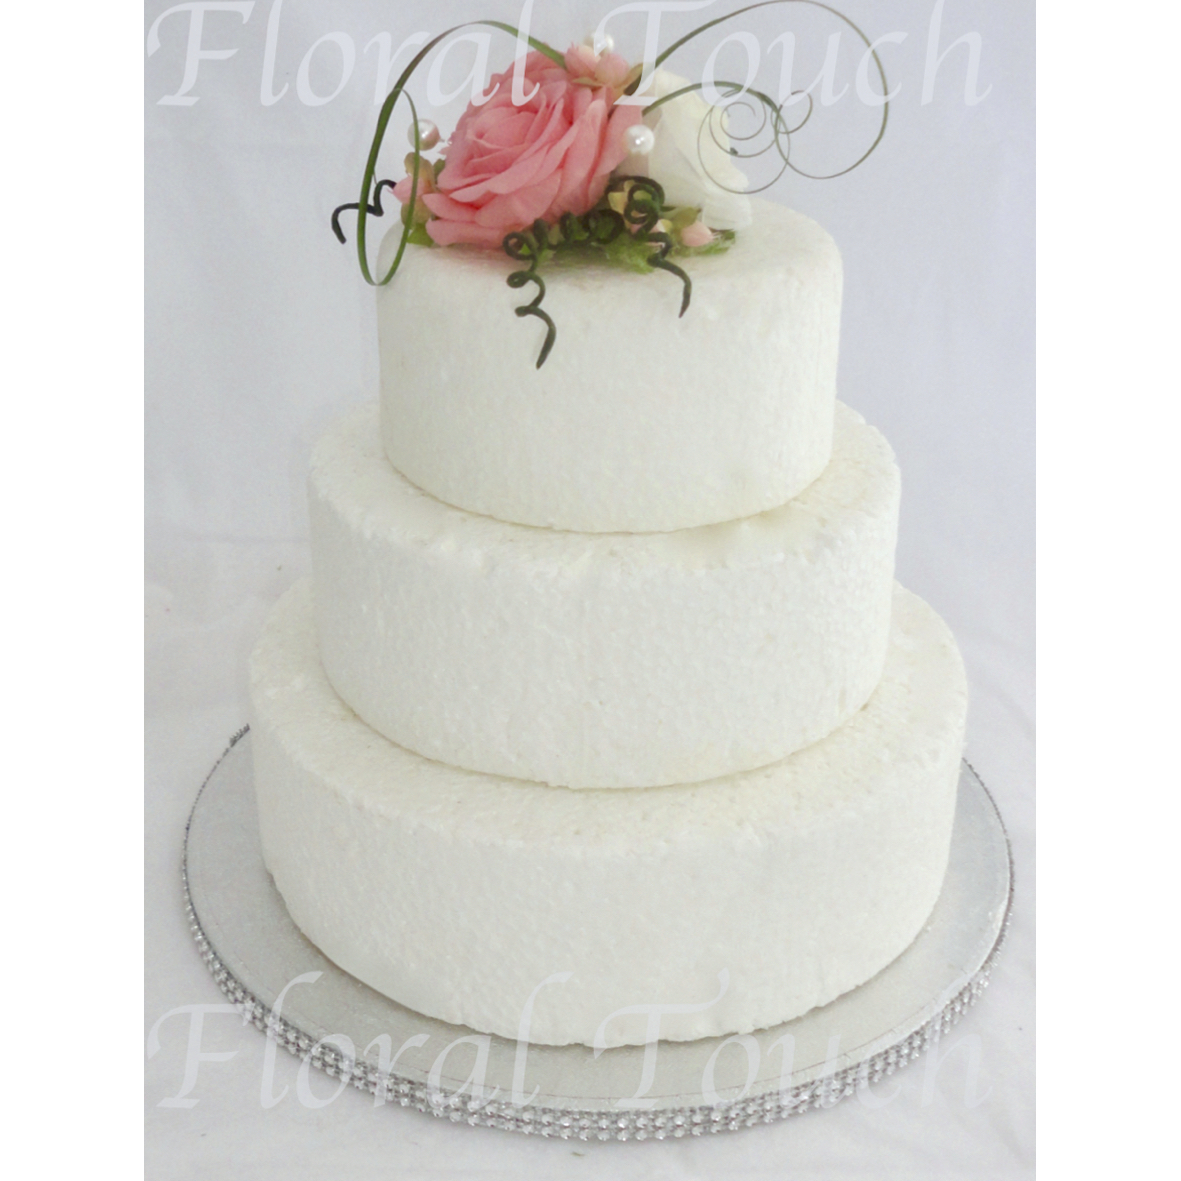 Coral & Ivory Cake Flowers